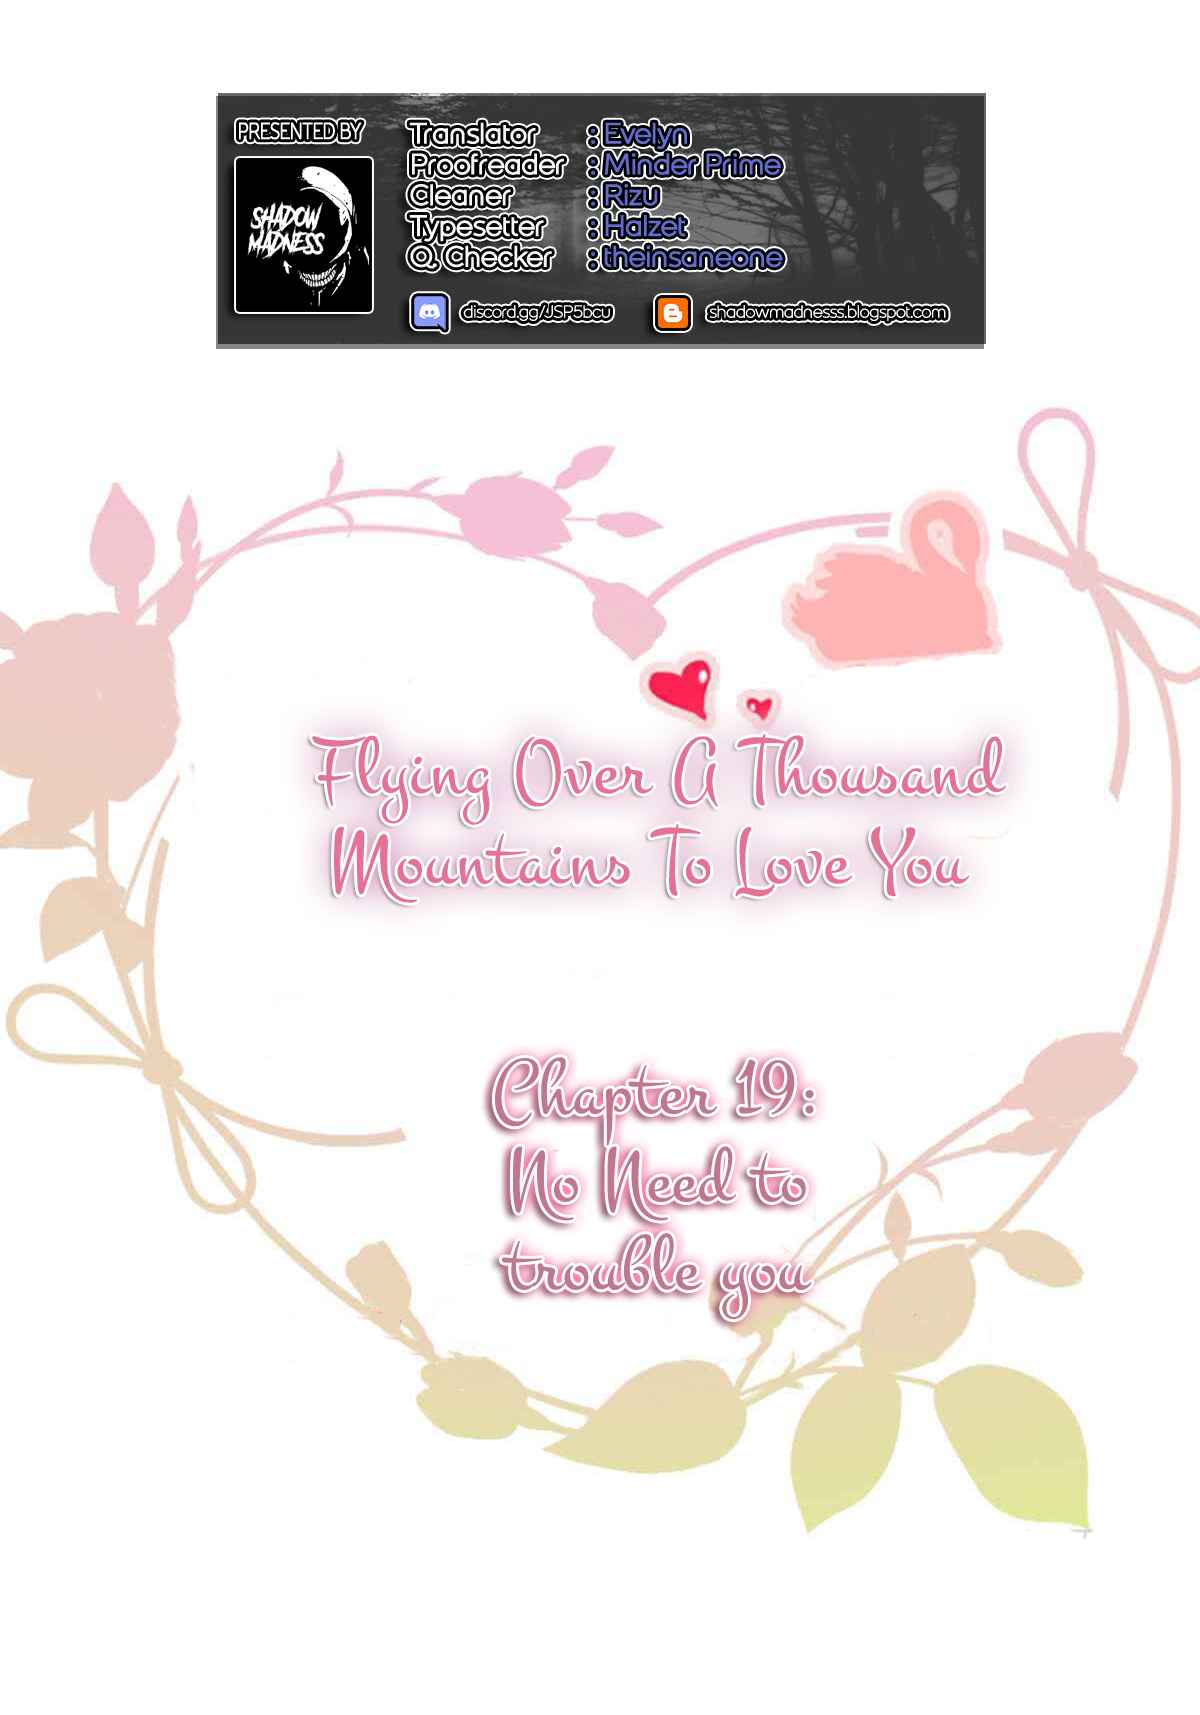 Flying Over a Thousand Mountains to Love You Ch. 19 No Need to Trouble You